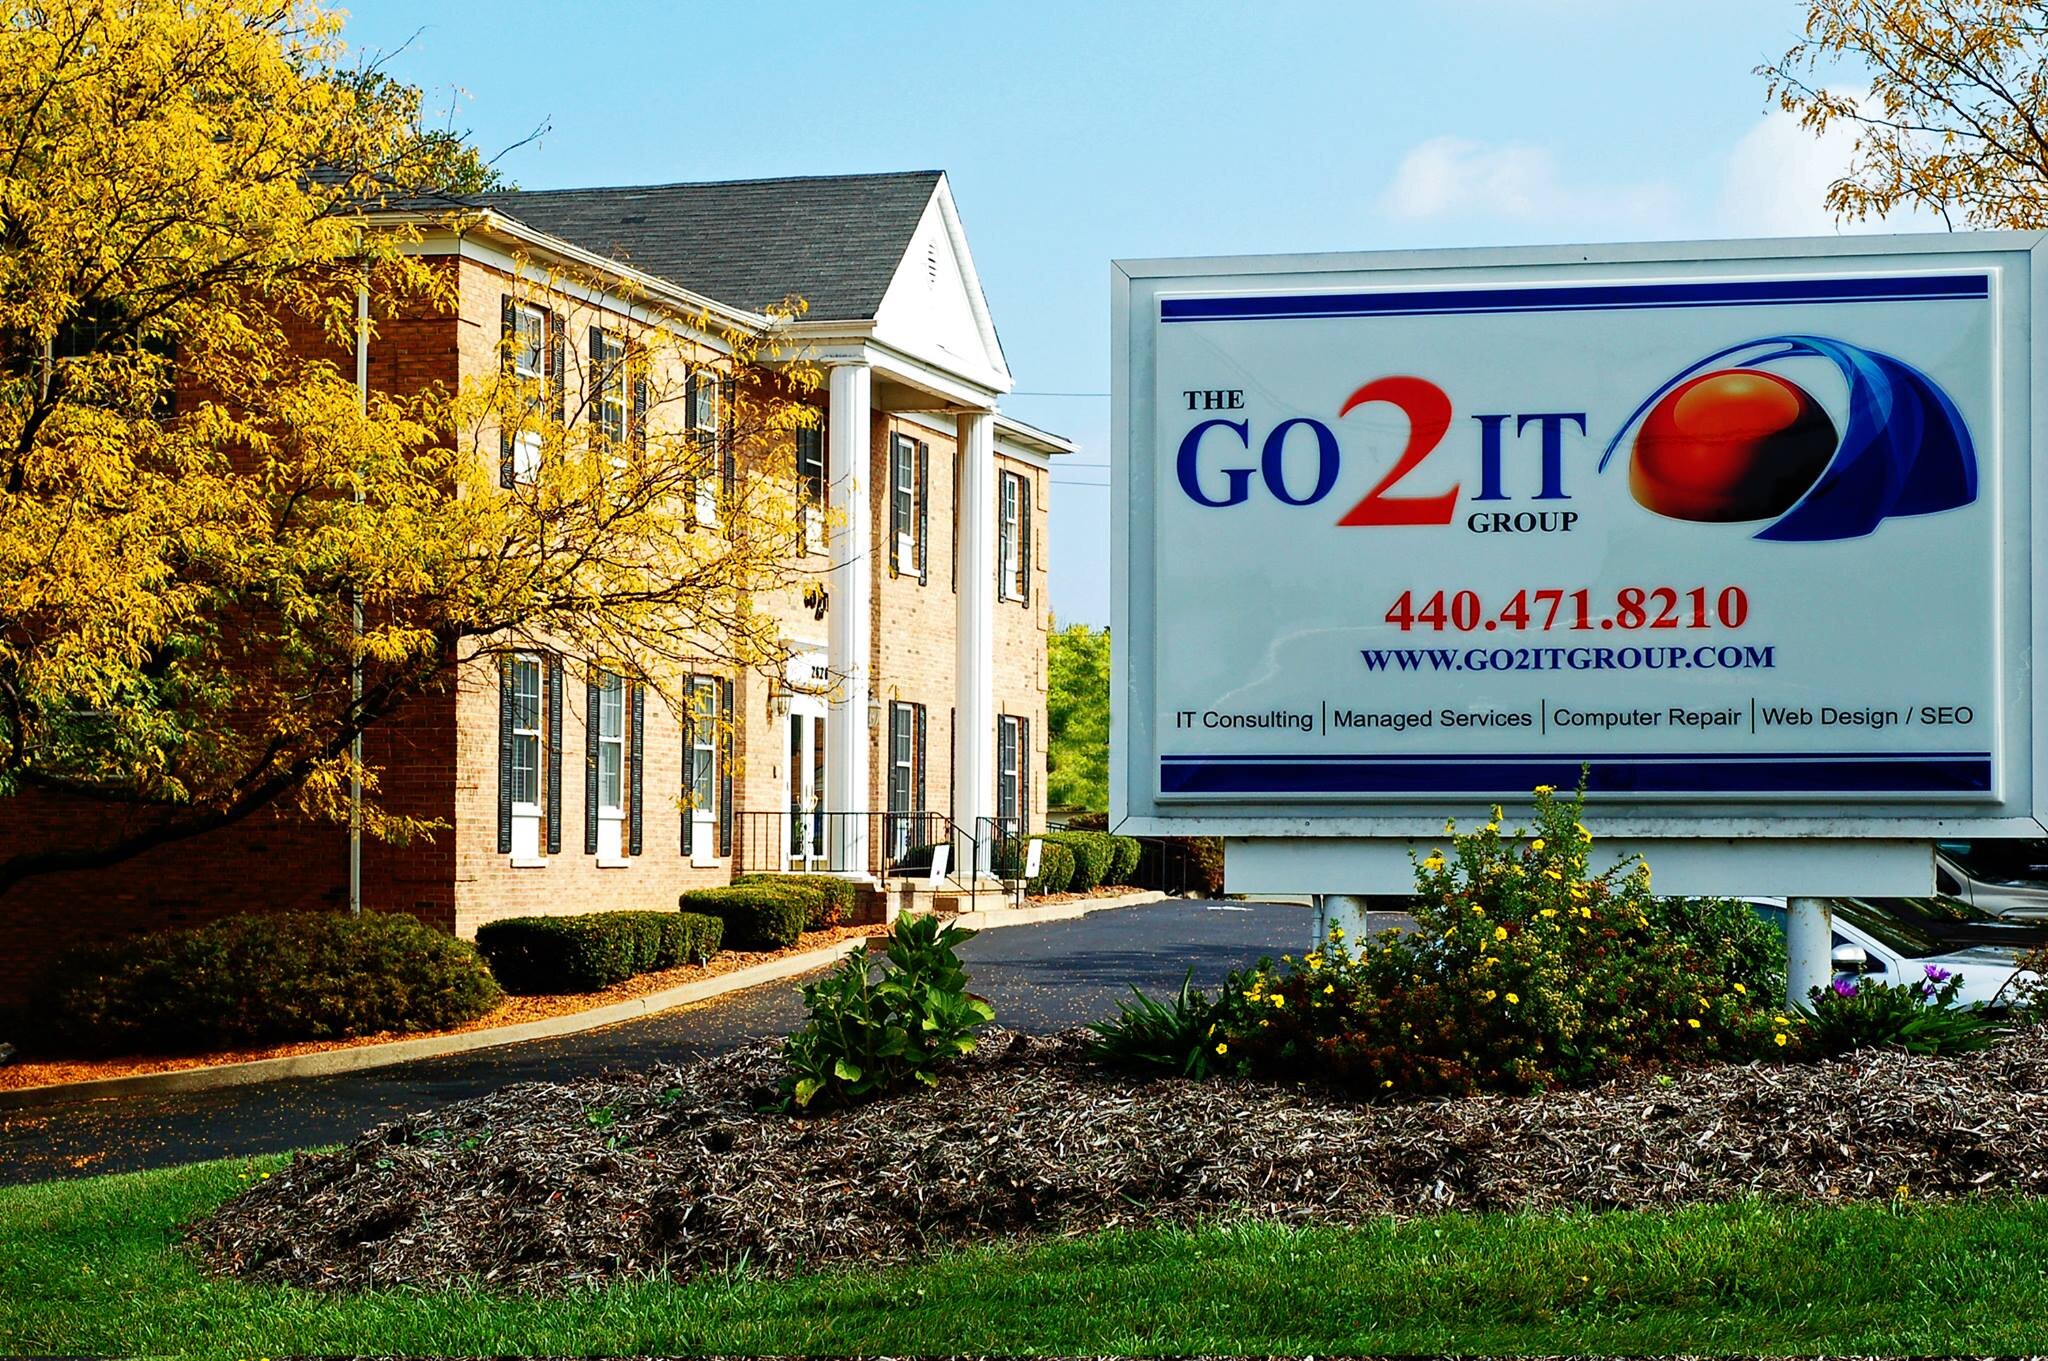 The Go2IT Group Headquarters